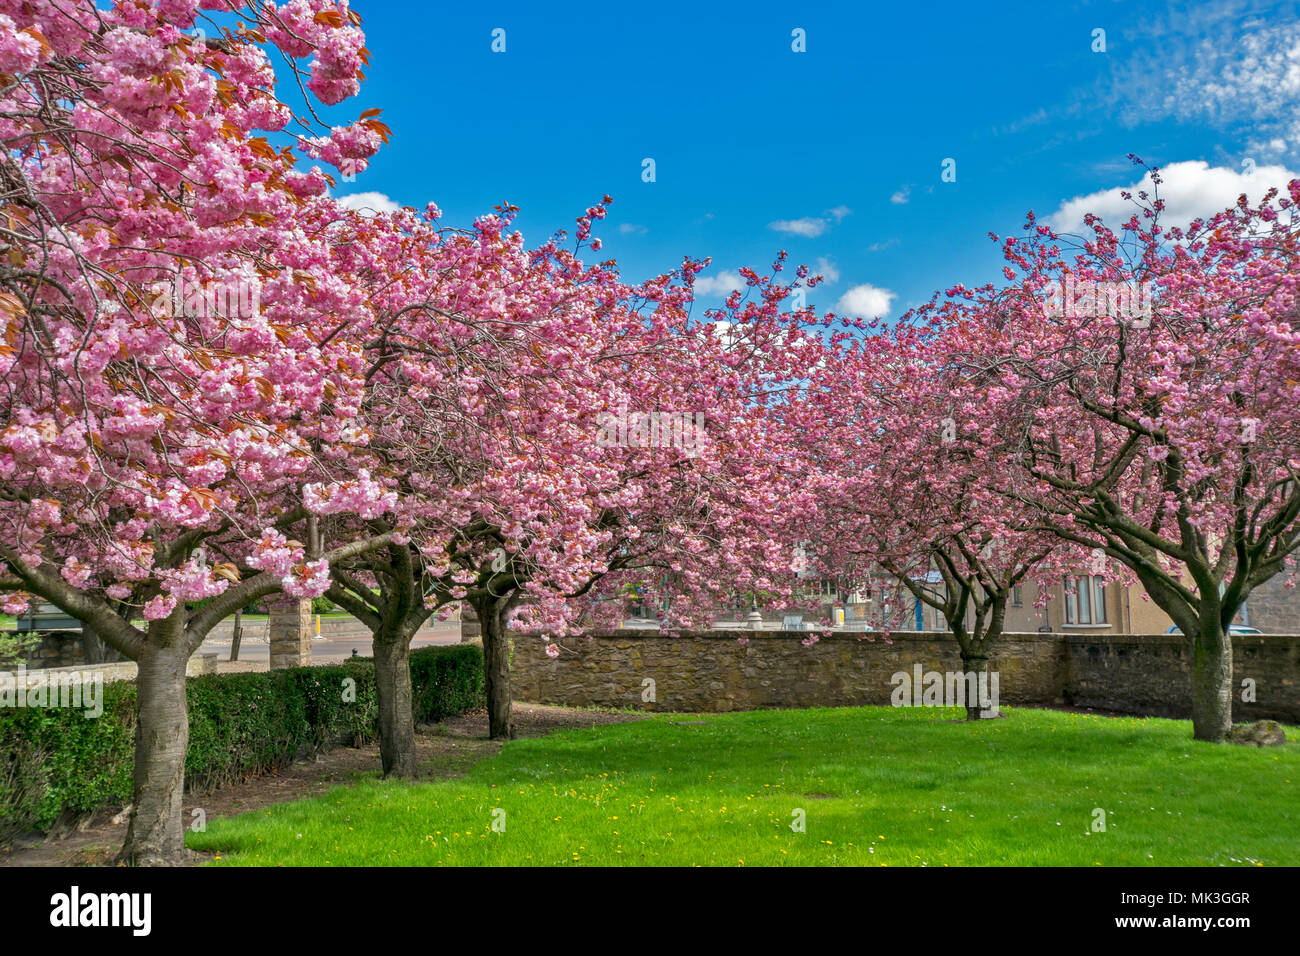 DR GRAYS HOSPITAL ELGIN MORAY SCOTLAND IN SPRING WITH TREES IN THE GROUNDS COVERED IN PINK  BLOSSOM Stock Photo